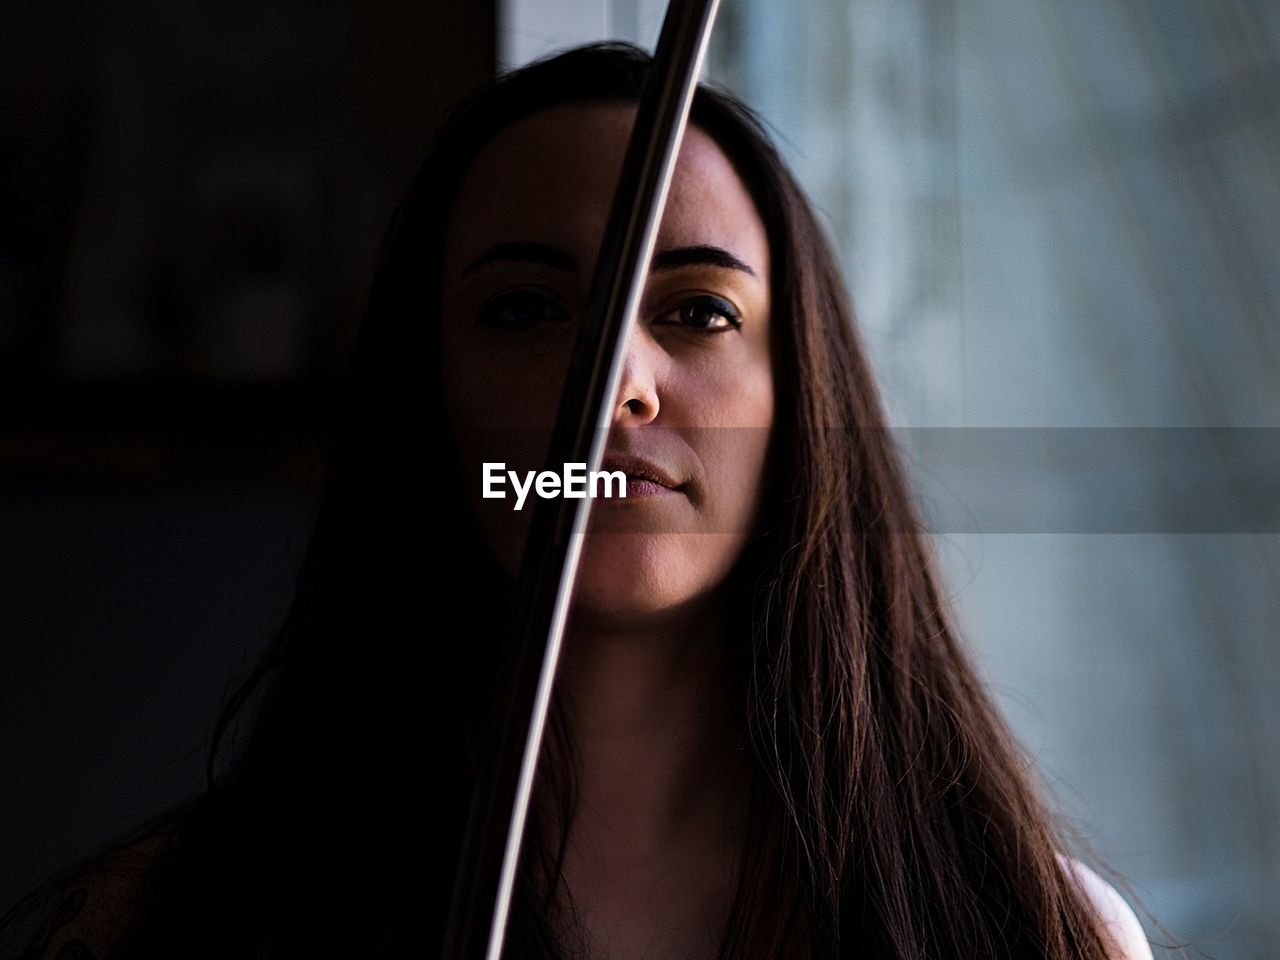 Portrait of young woman by metal rod at home